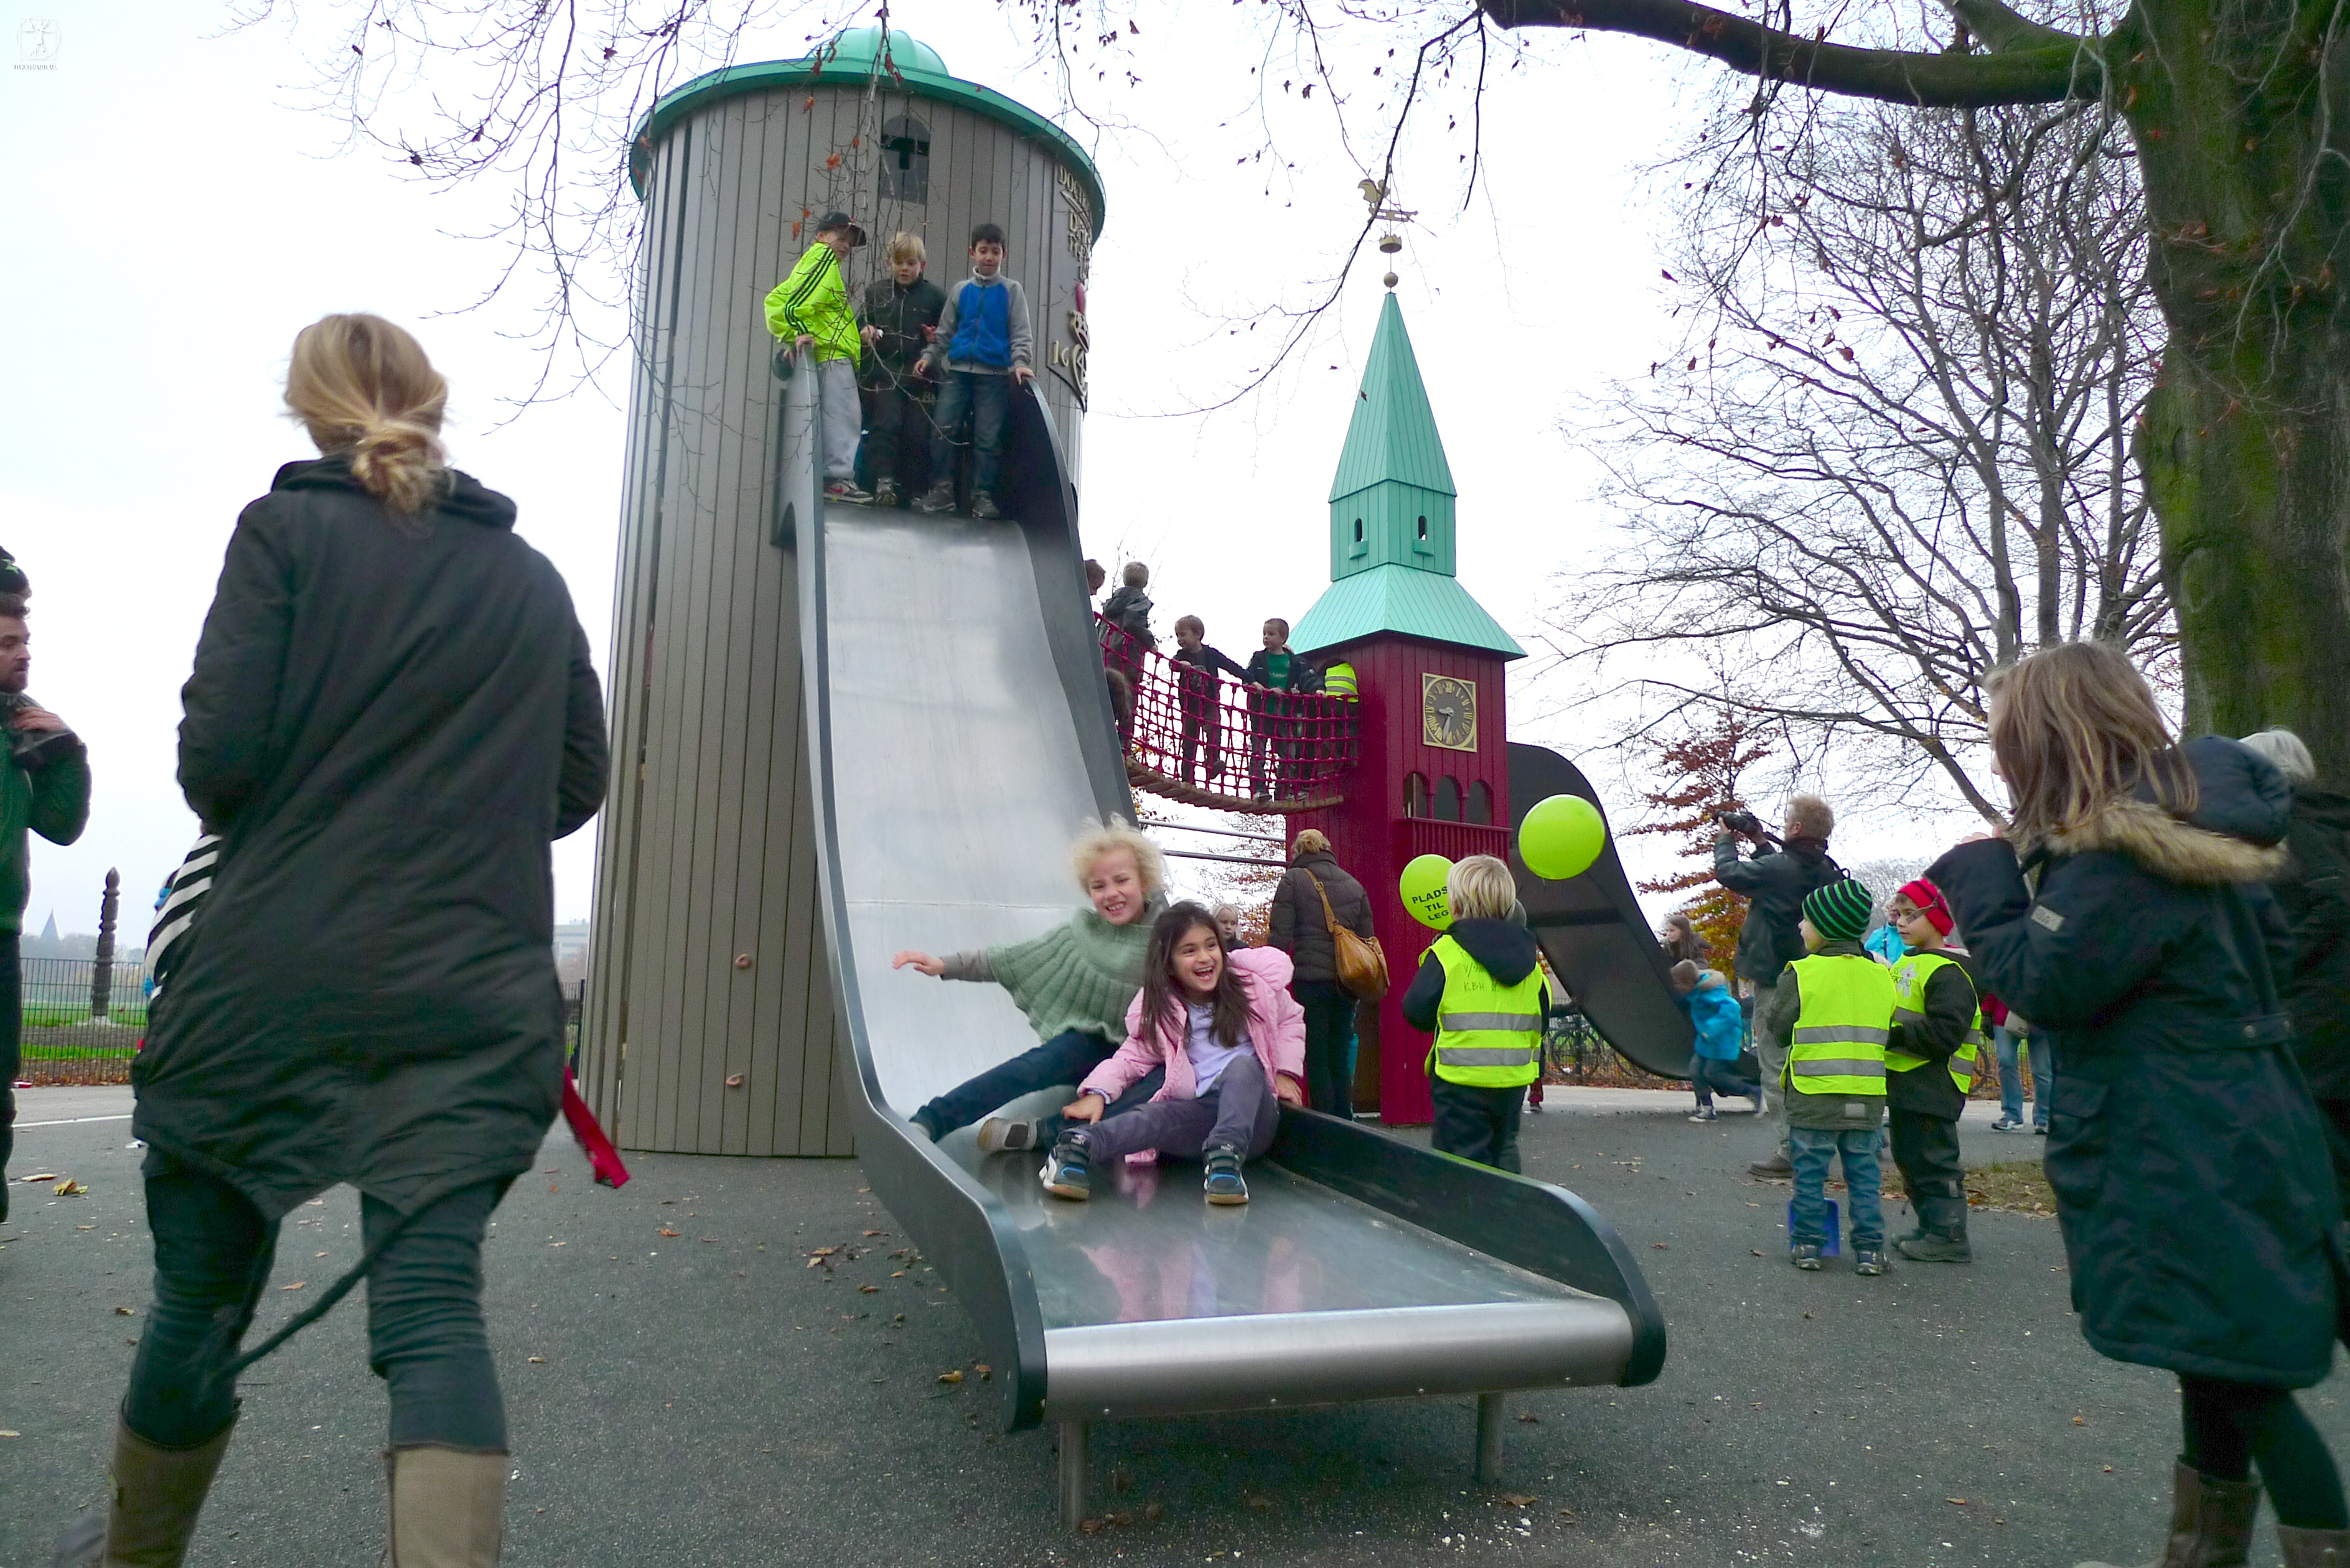 Groups of kids on the wide slide